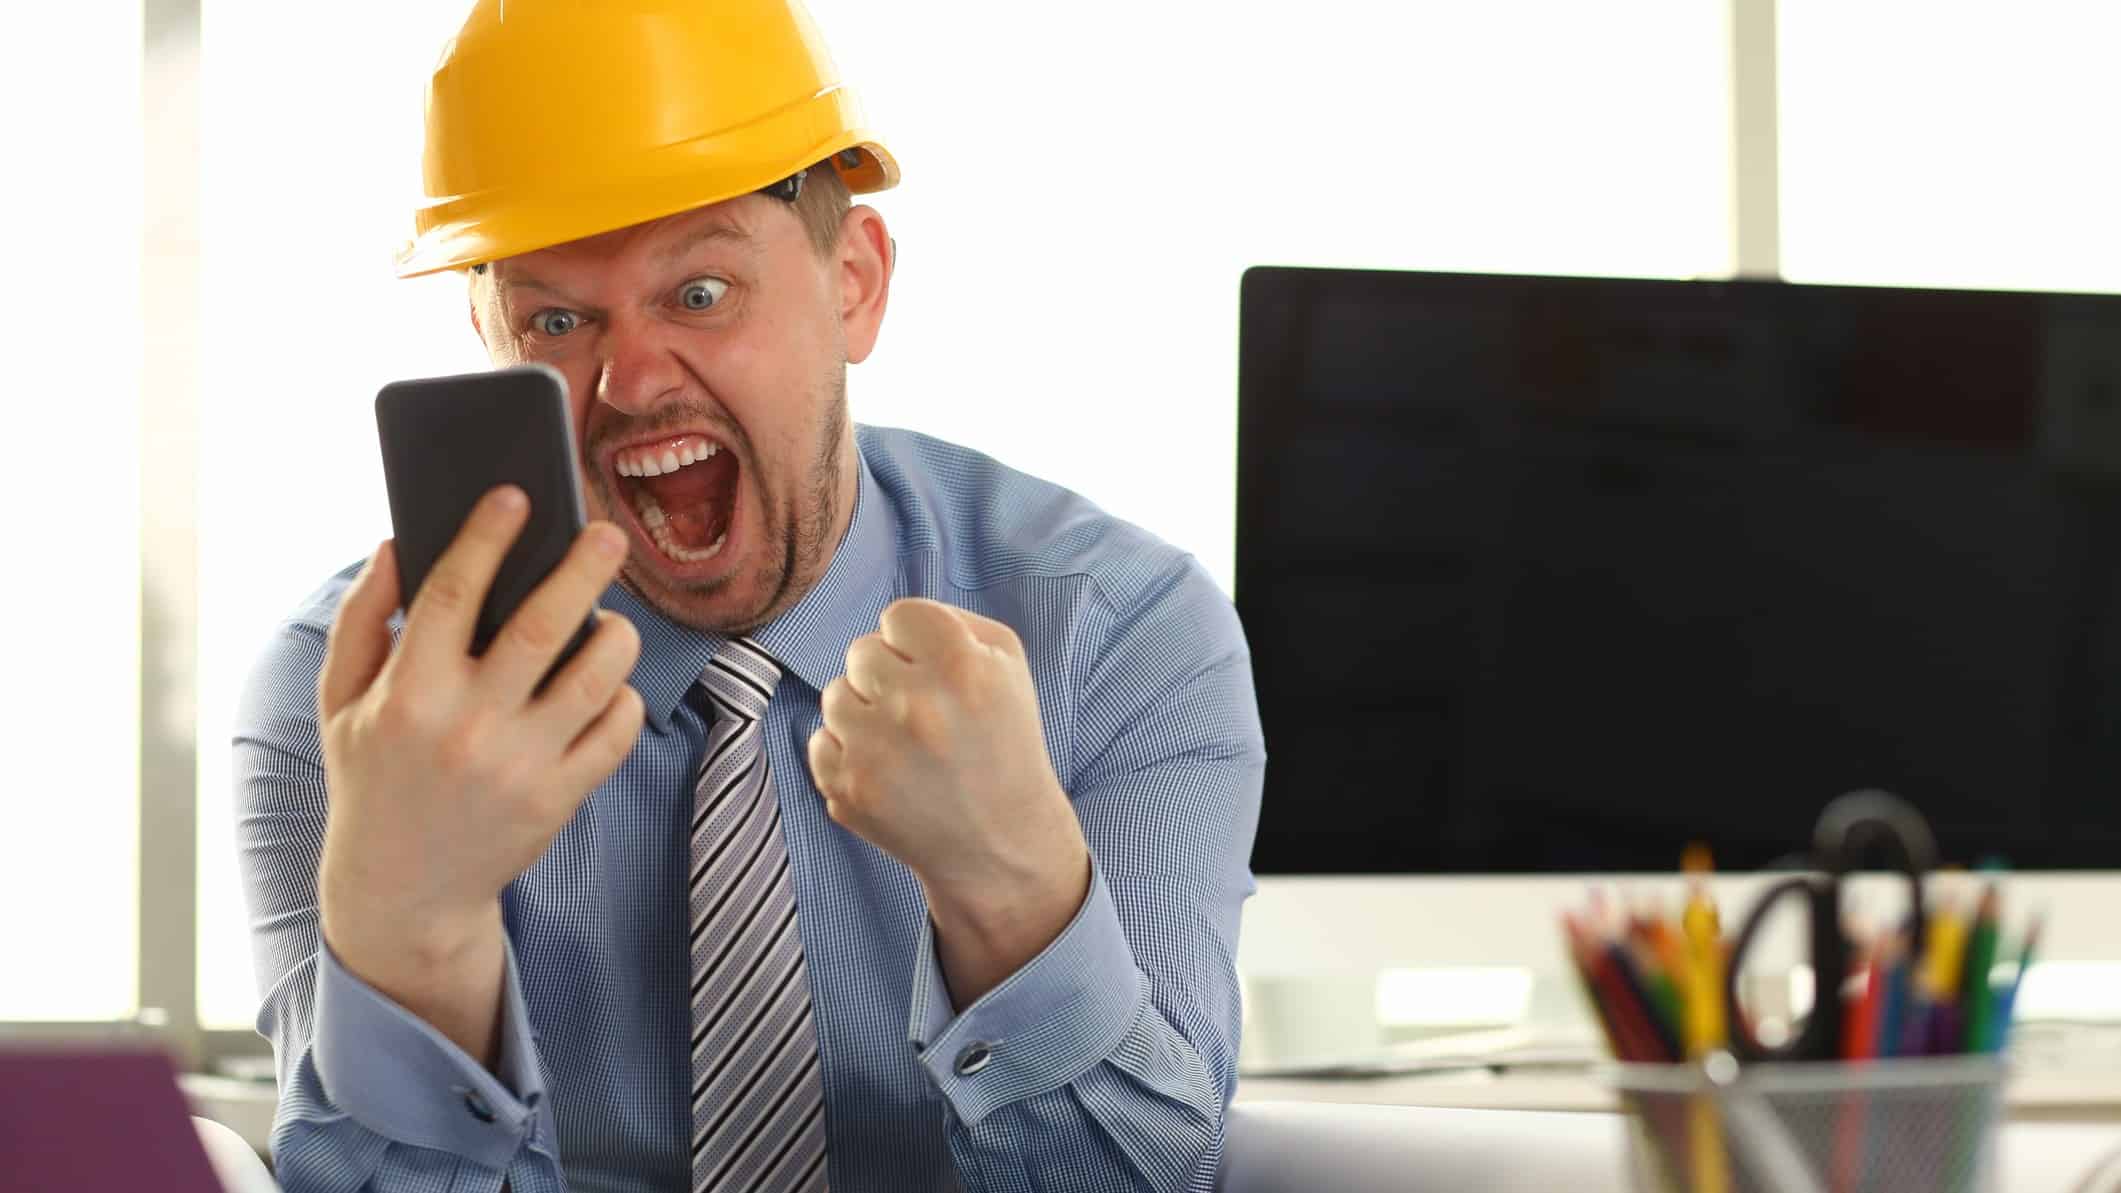 Boral share price ASX investor wearing a hard hat looking excitedly at a mobile phone representing rising iron ore price